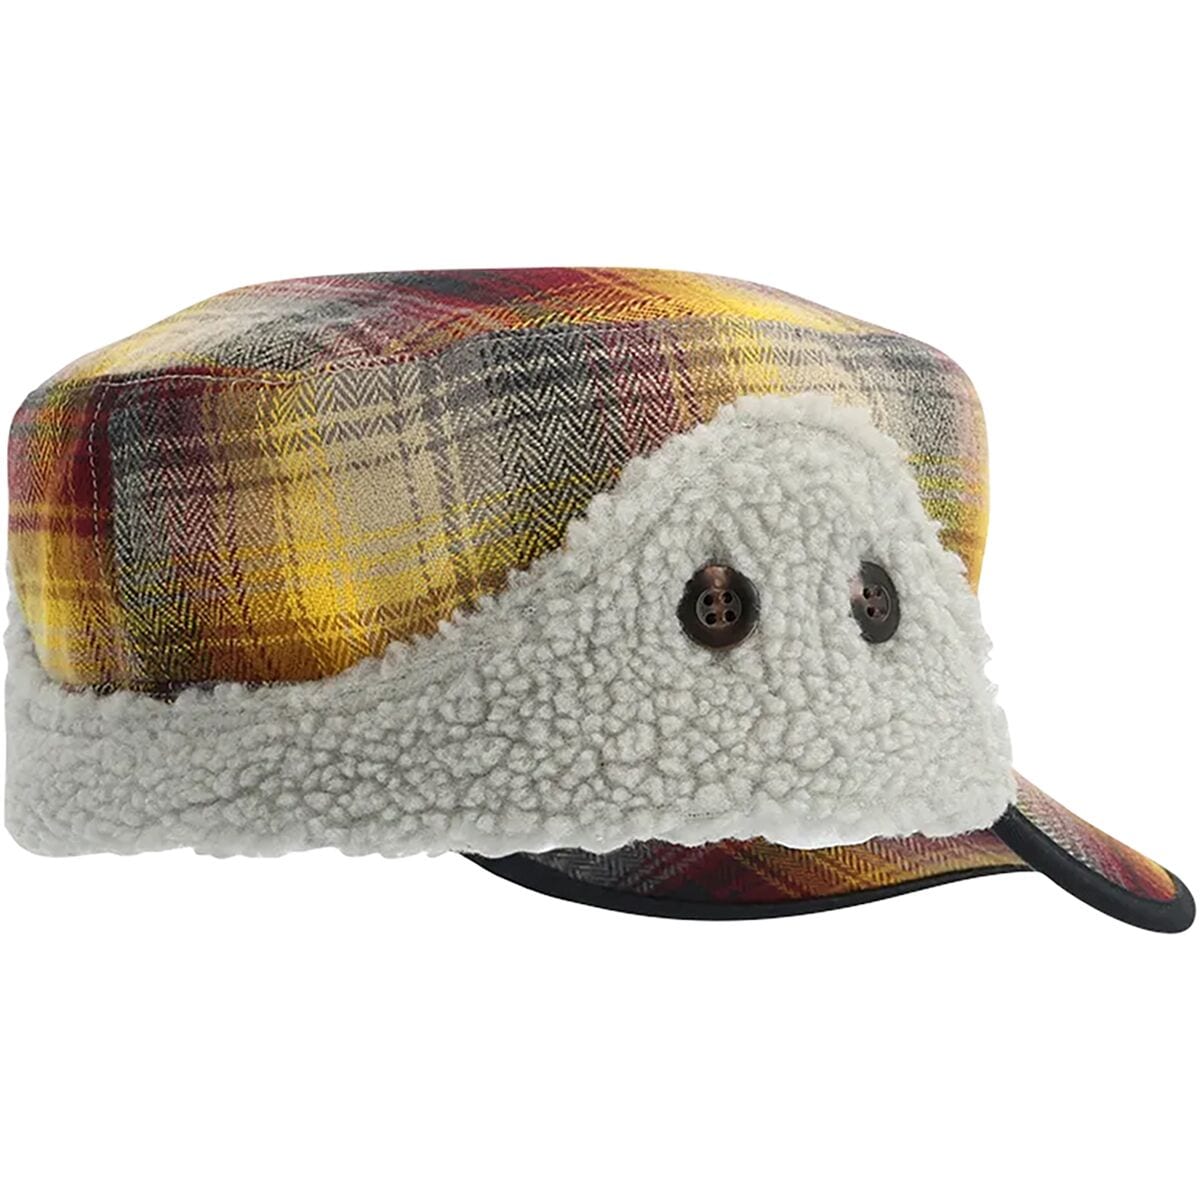 Hats & Outdoor Accessories for All Seasons – Turtle Fur®